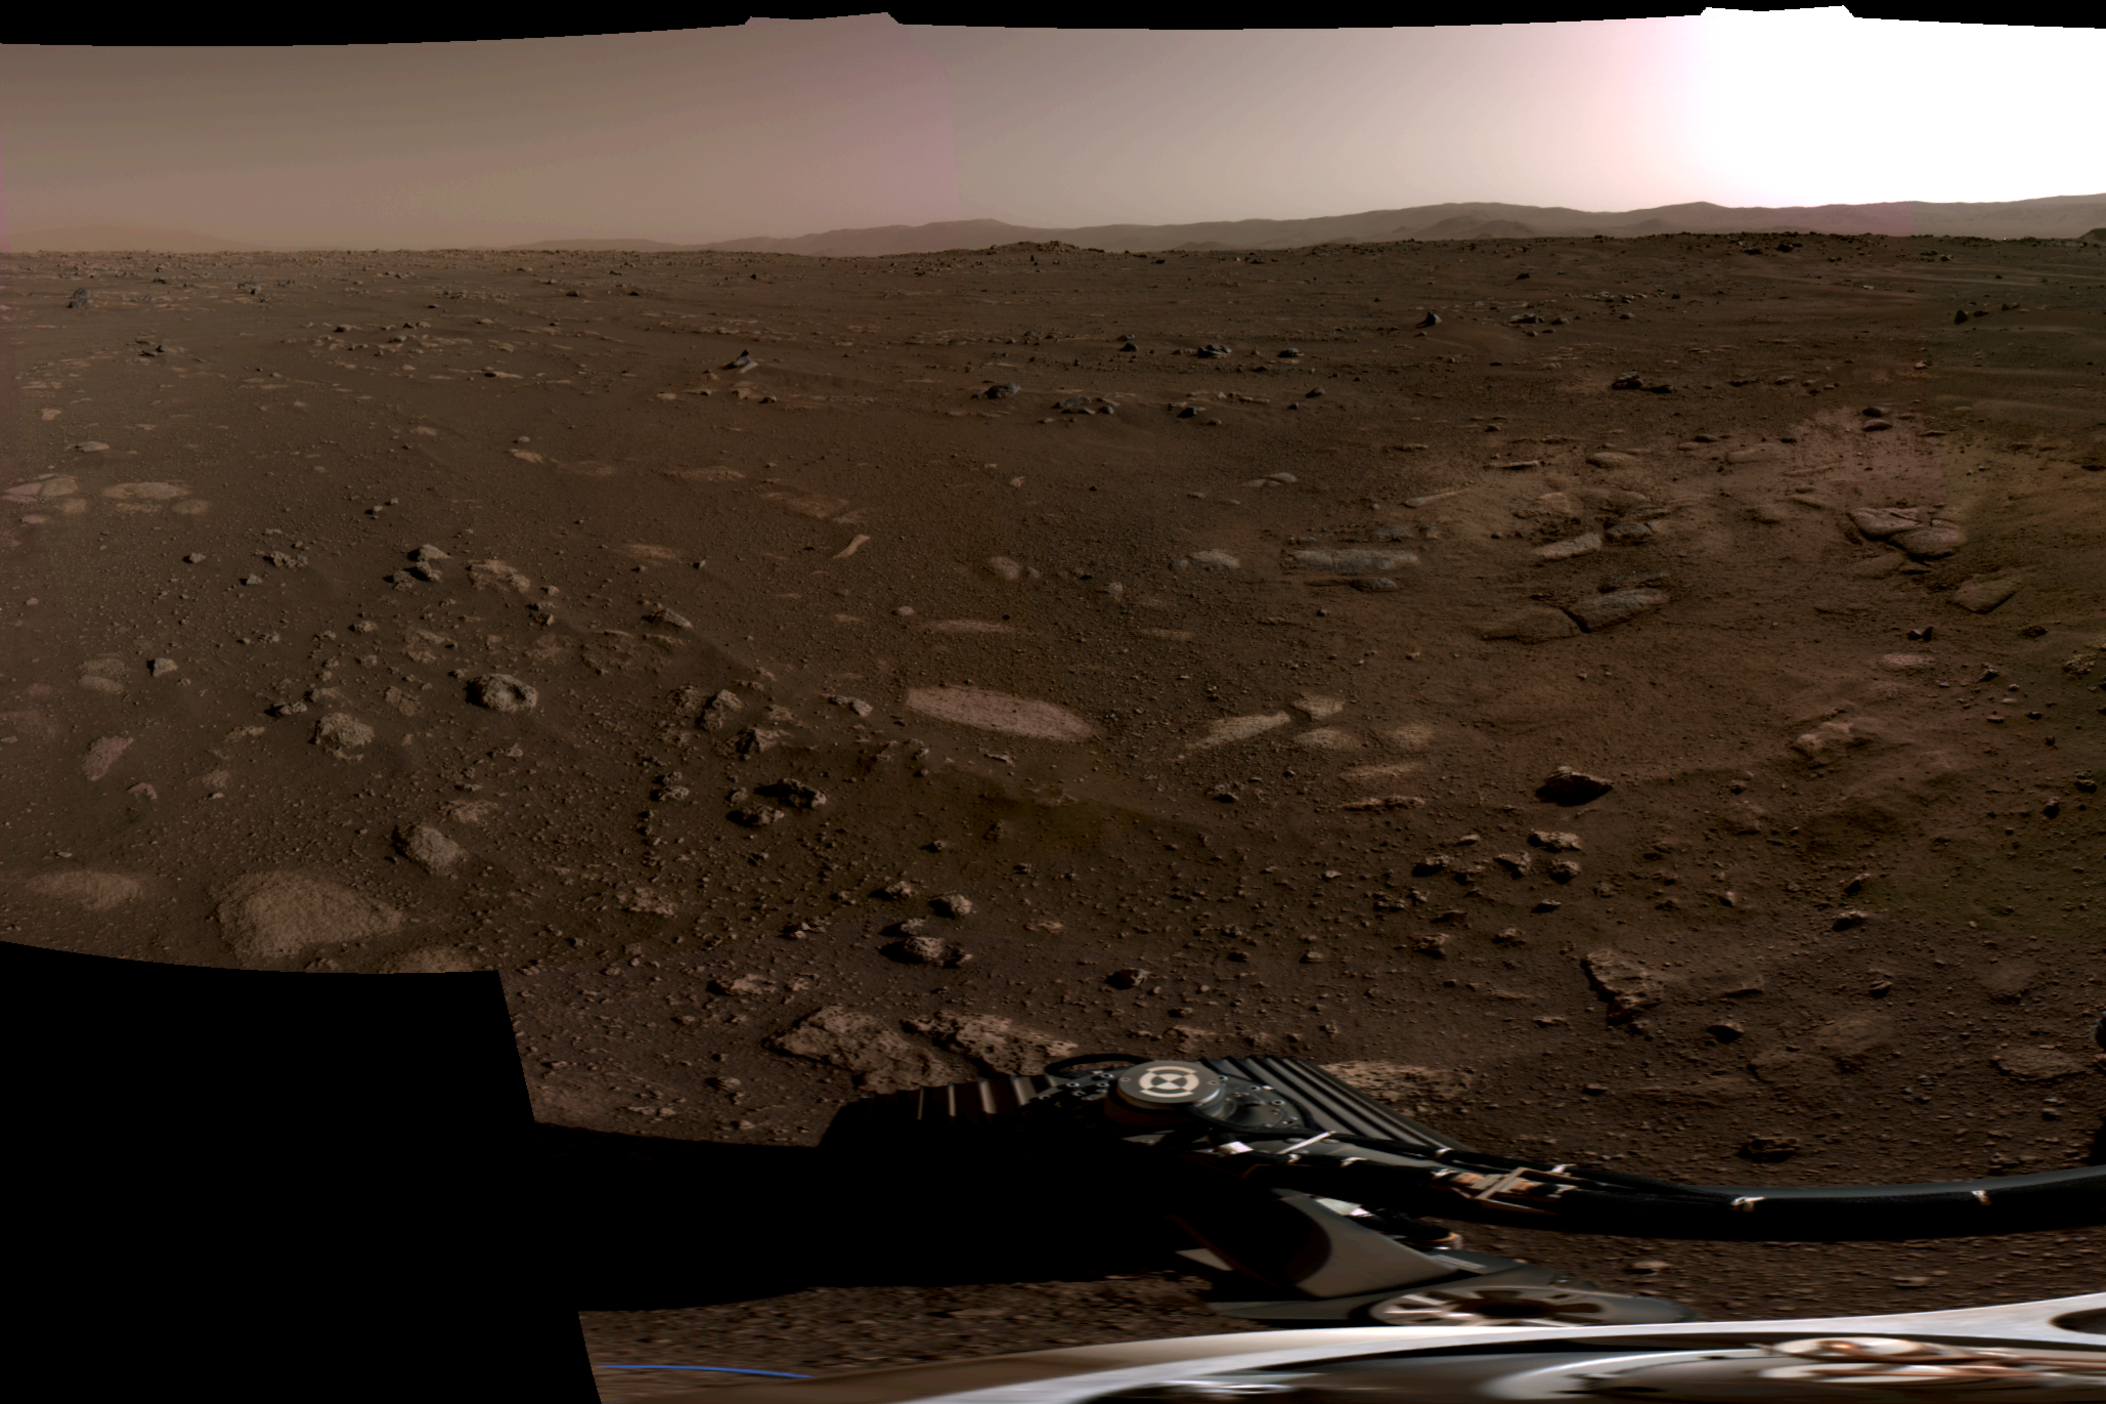 Panoramic Image from the surface of Mars